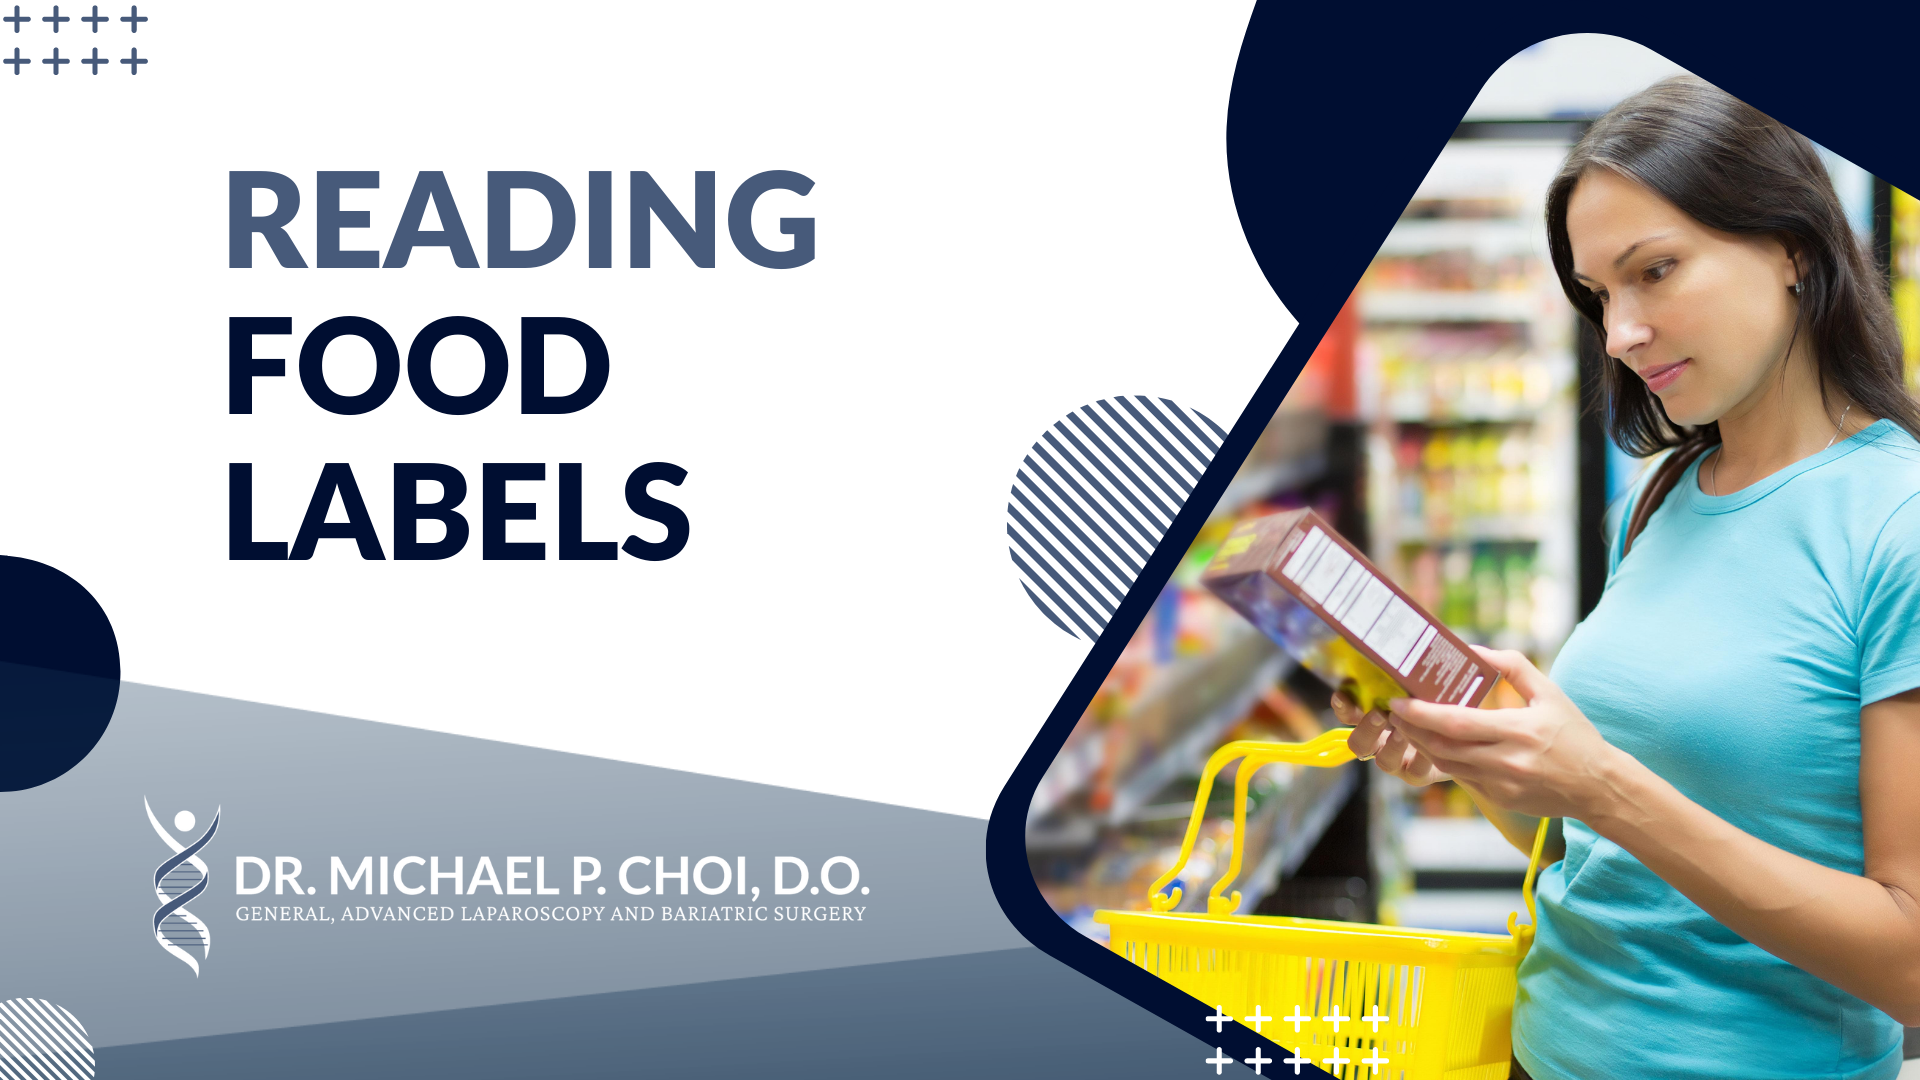 READING FOOD LABELS